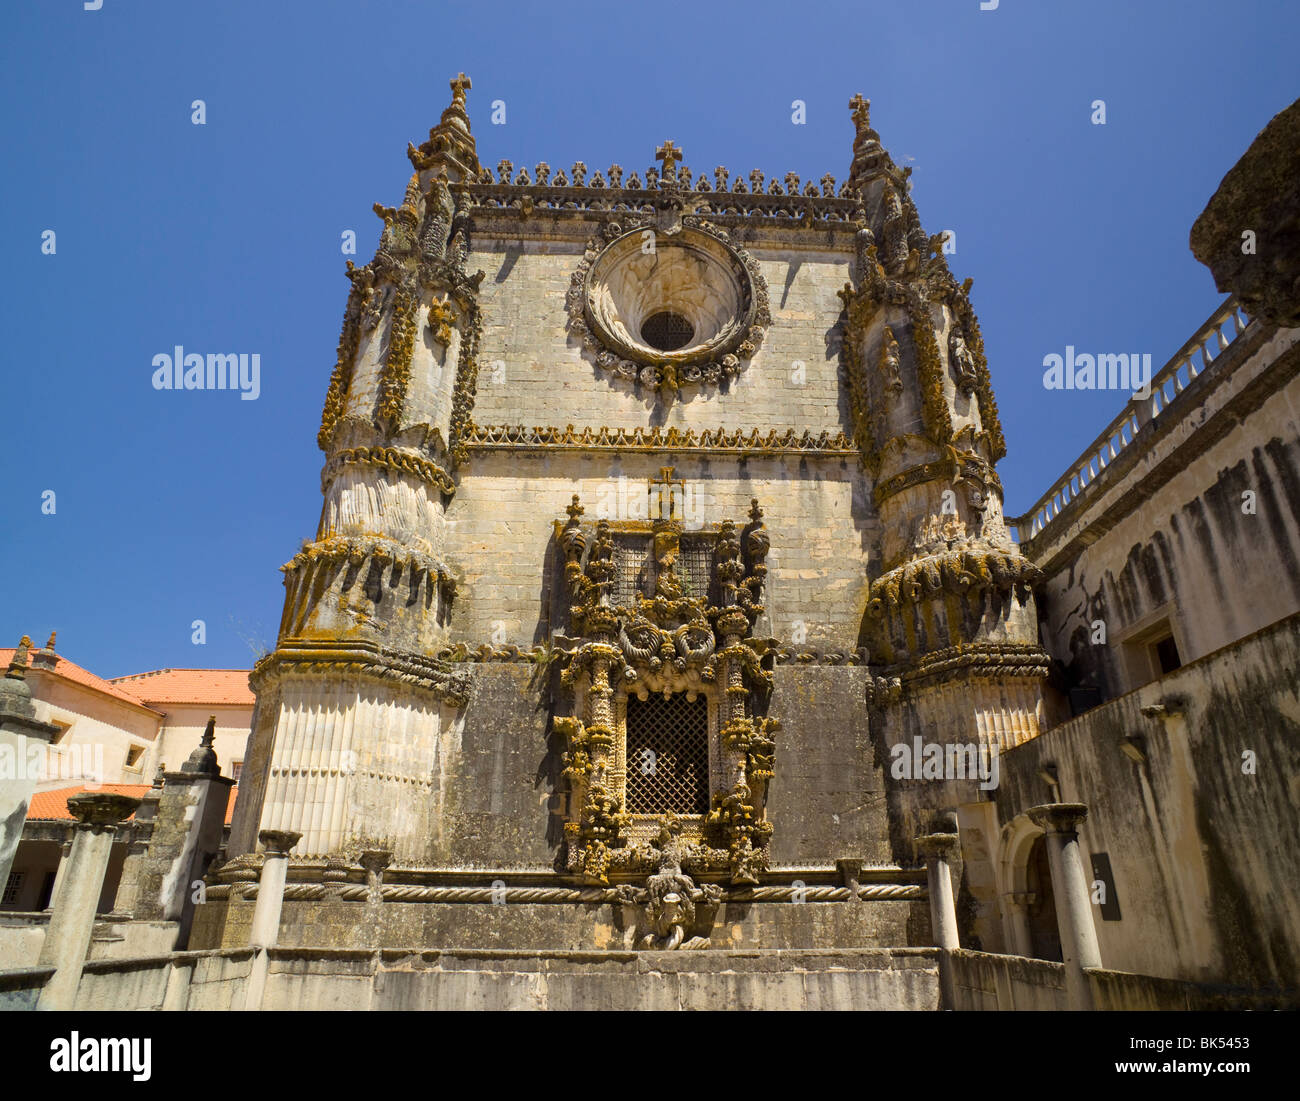 Estremadura, Tomar, The Ornate Chapter House Window In The Convent Of Christ Stock Photo